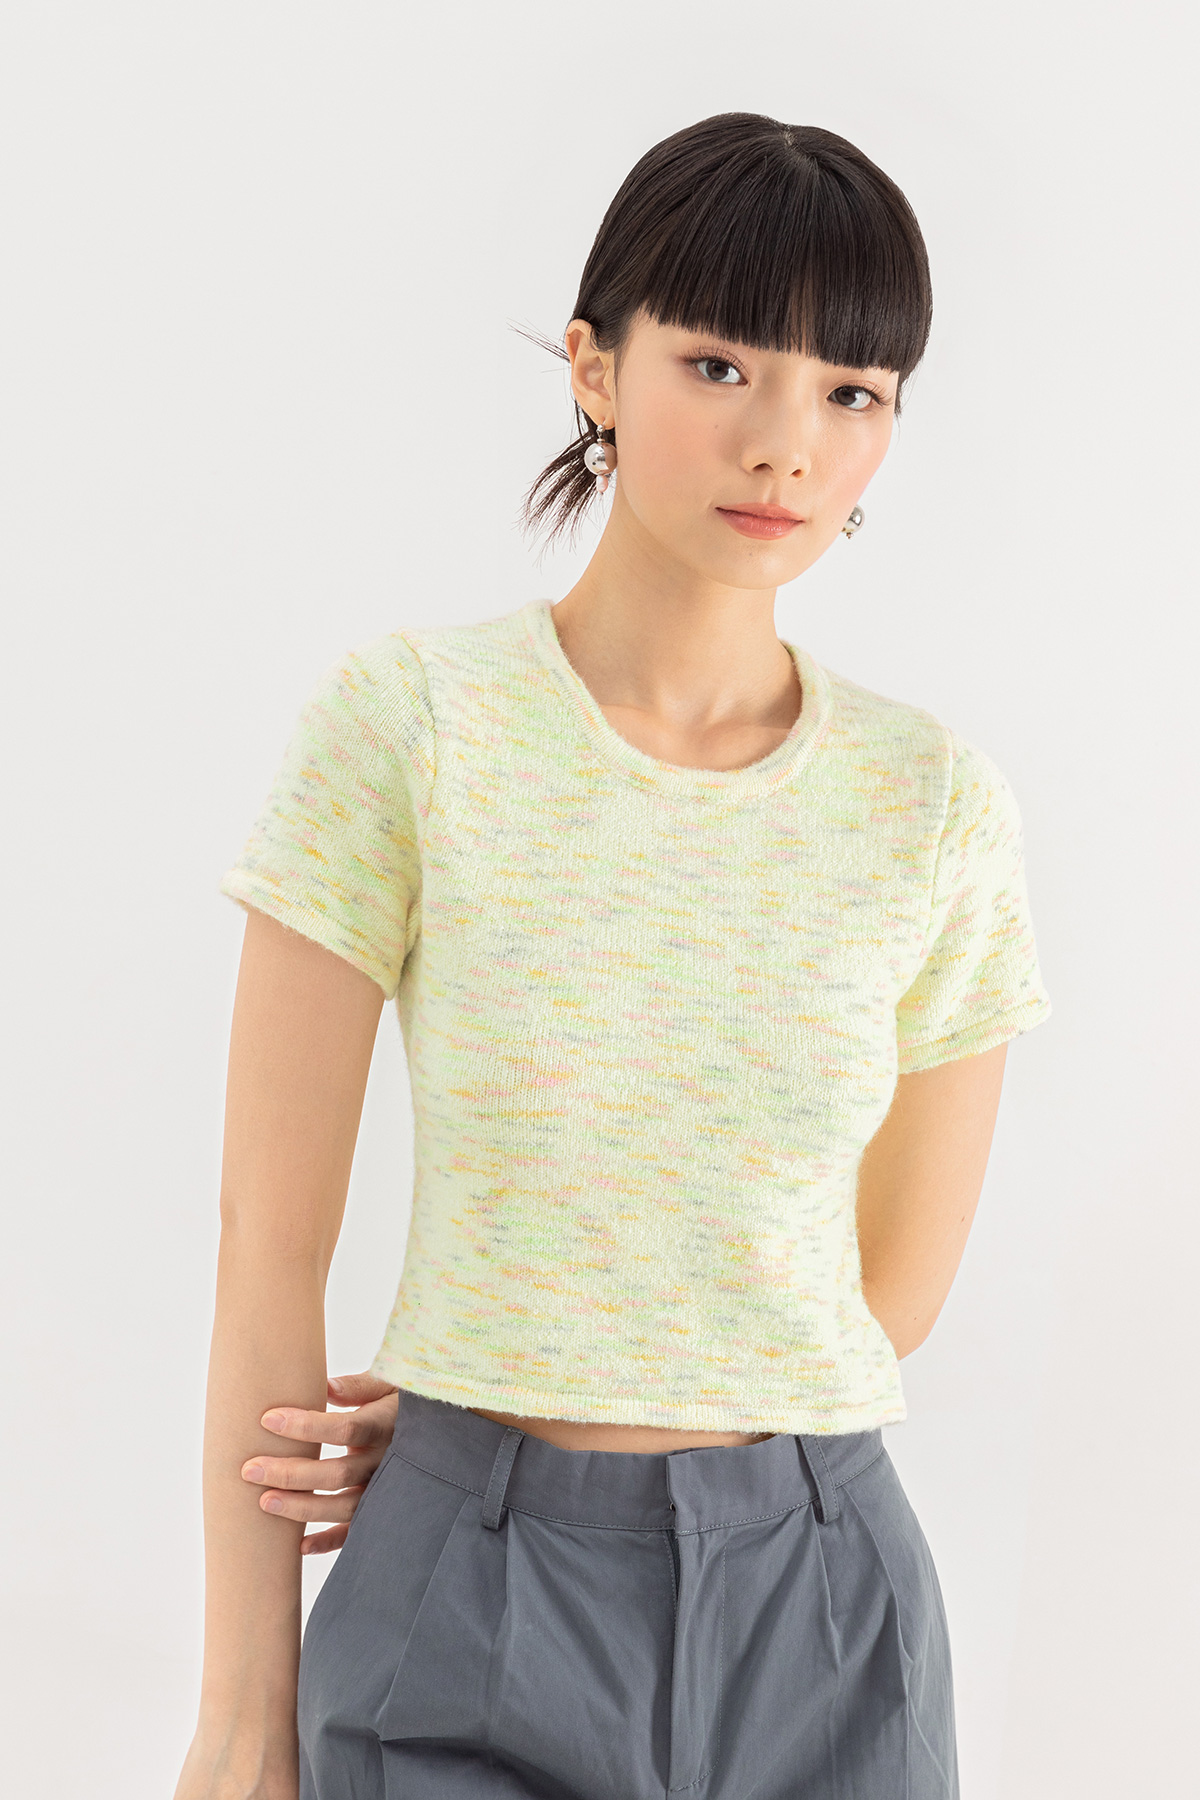 *SALE* FELICITE TOP - RAINBOW SPRINKLES [BY MODPARADE]